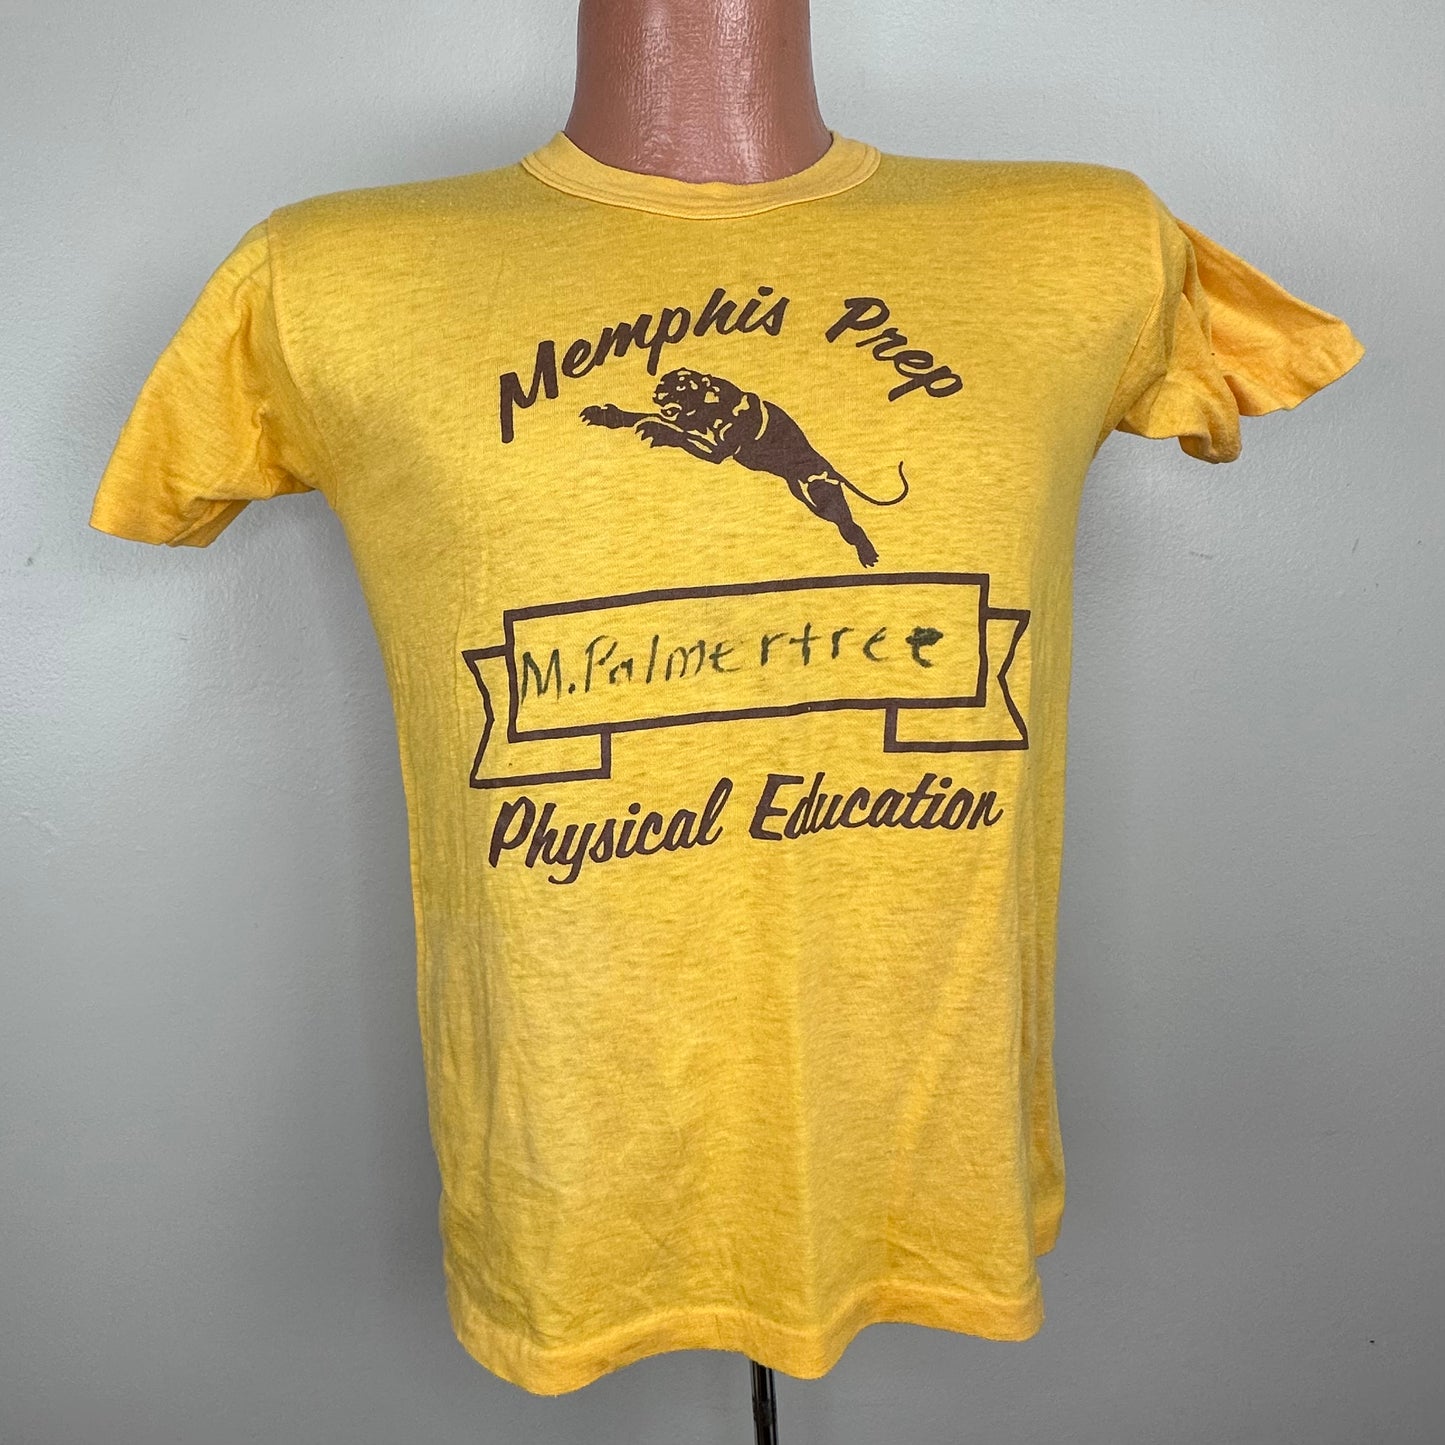 1970s Memphis Prep Physical Education T-Shirt, Panthers, Size Small